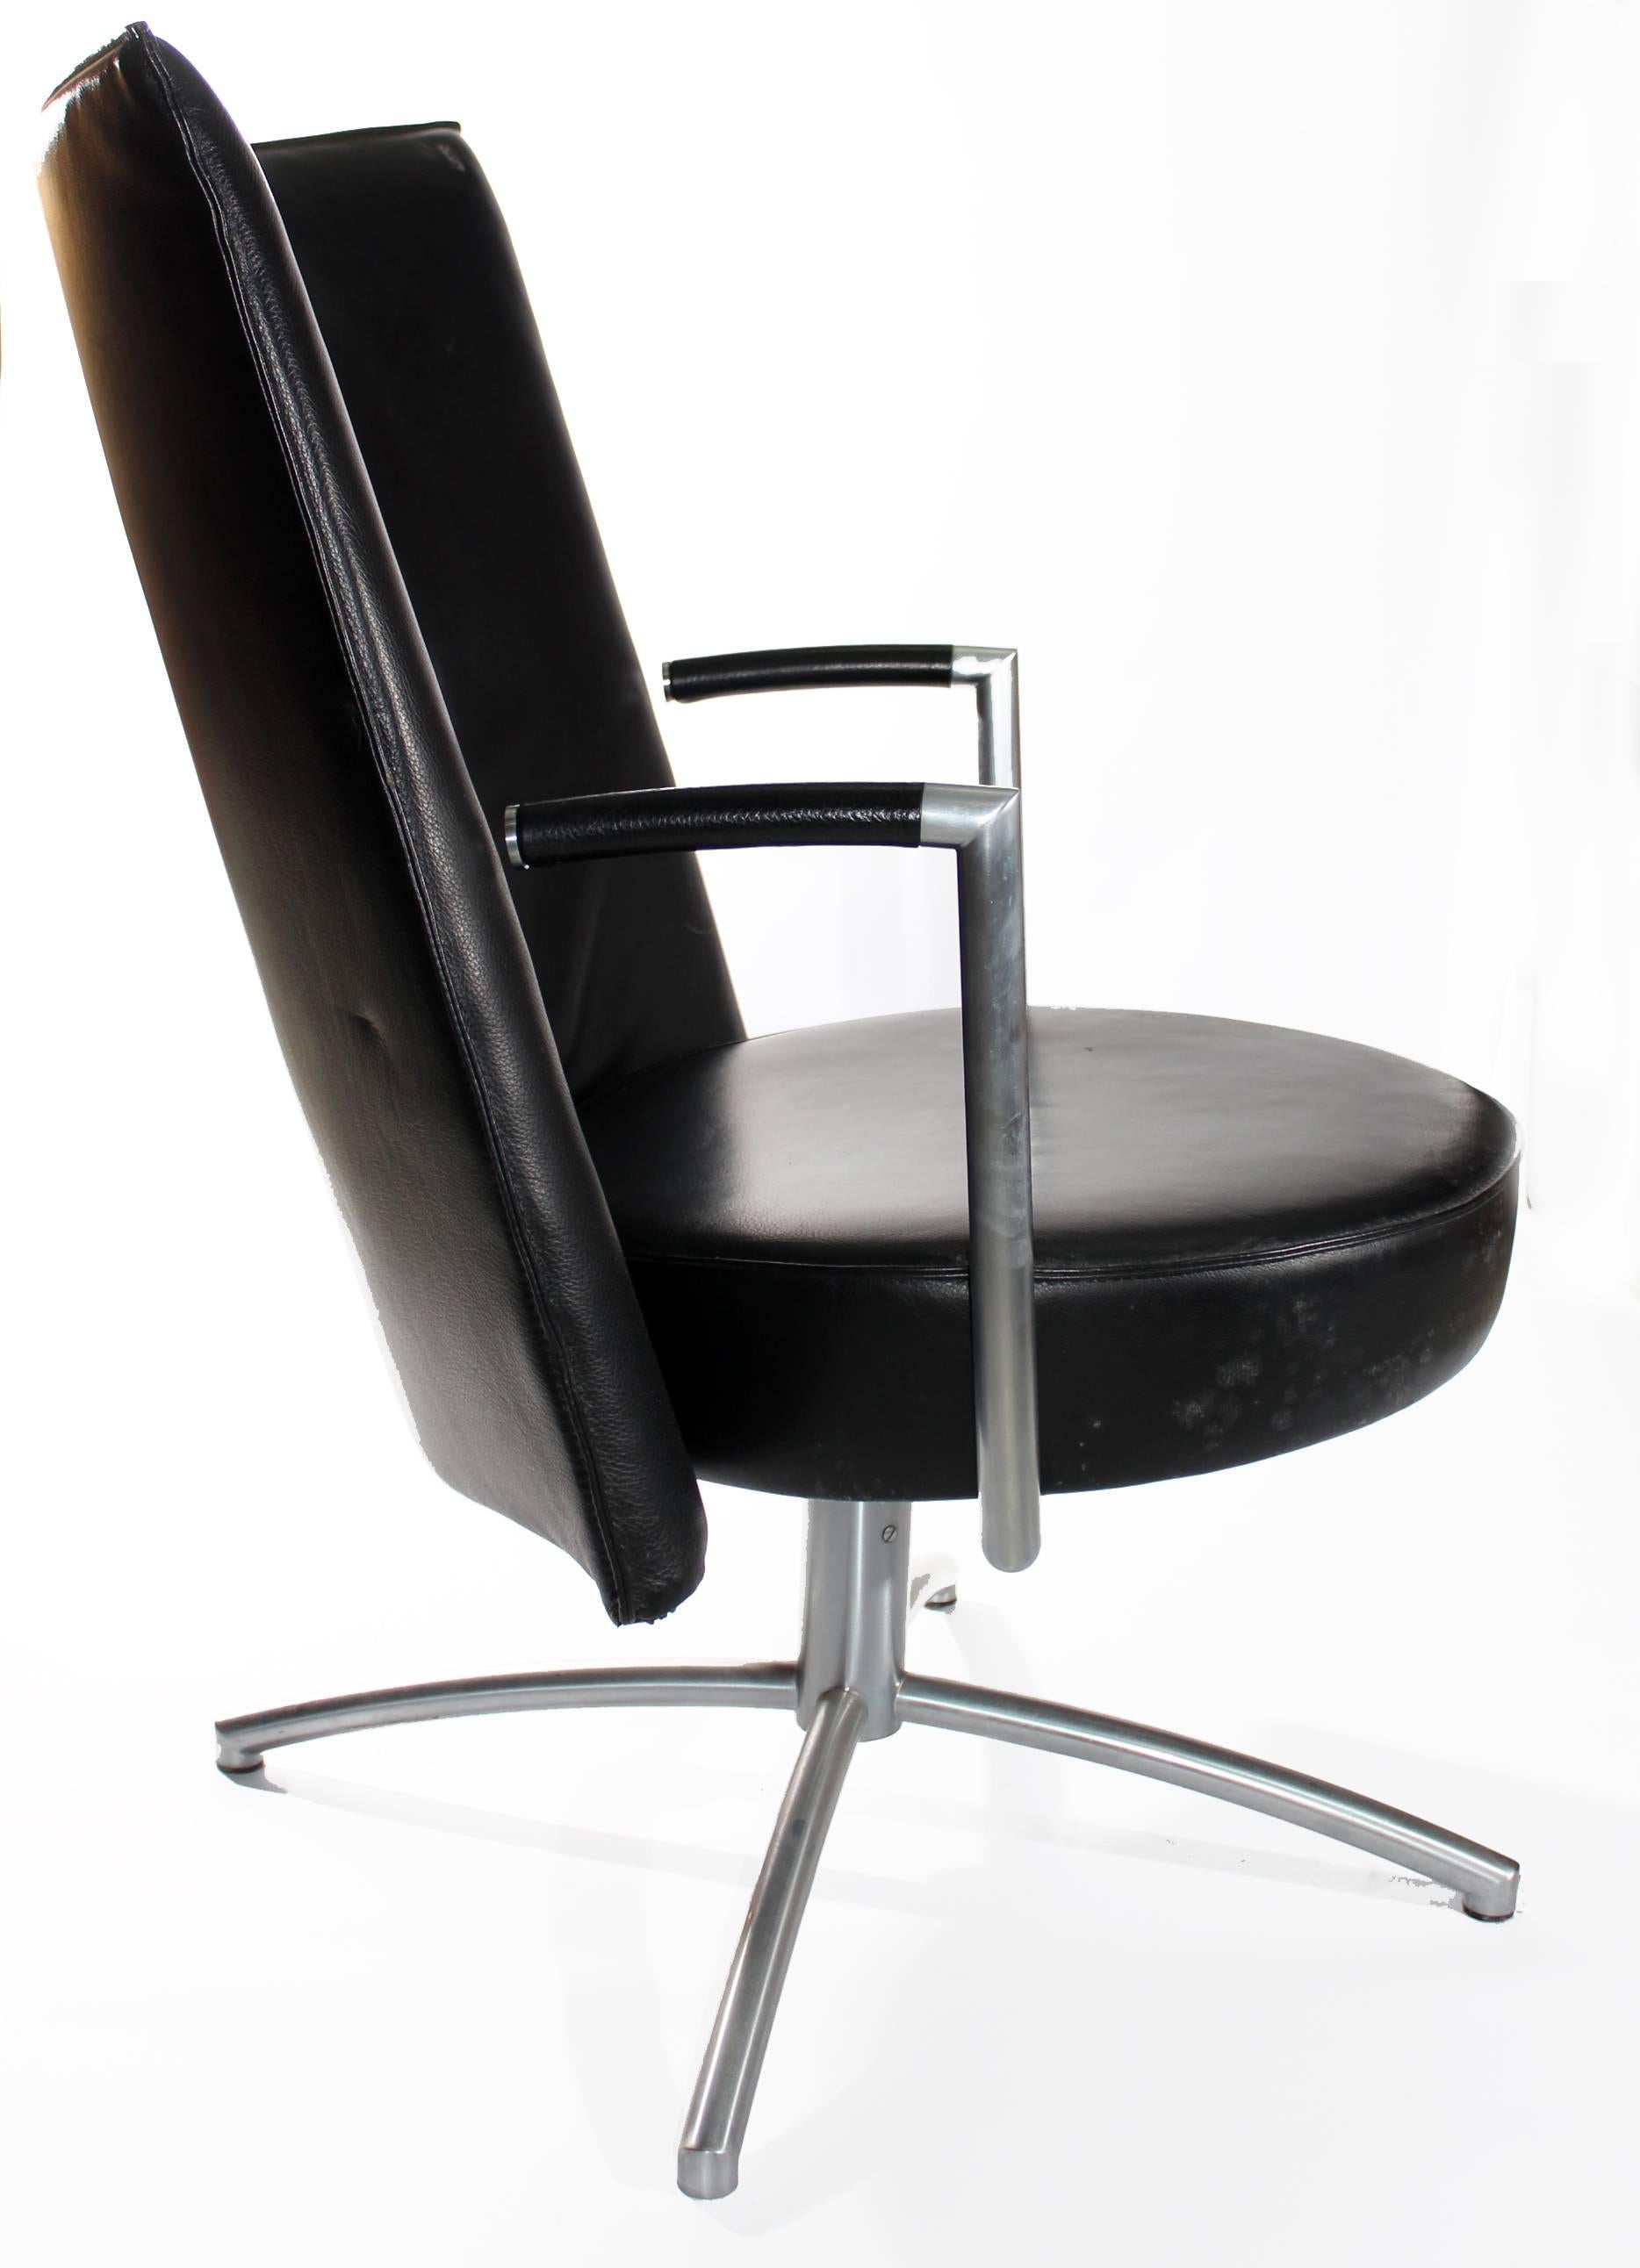 Contemporary Foersom & Hiort-Lorentzen Leather and Stainless Steel Club Chair